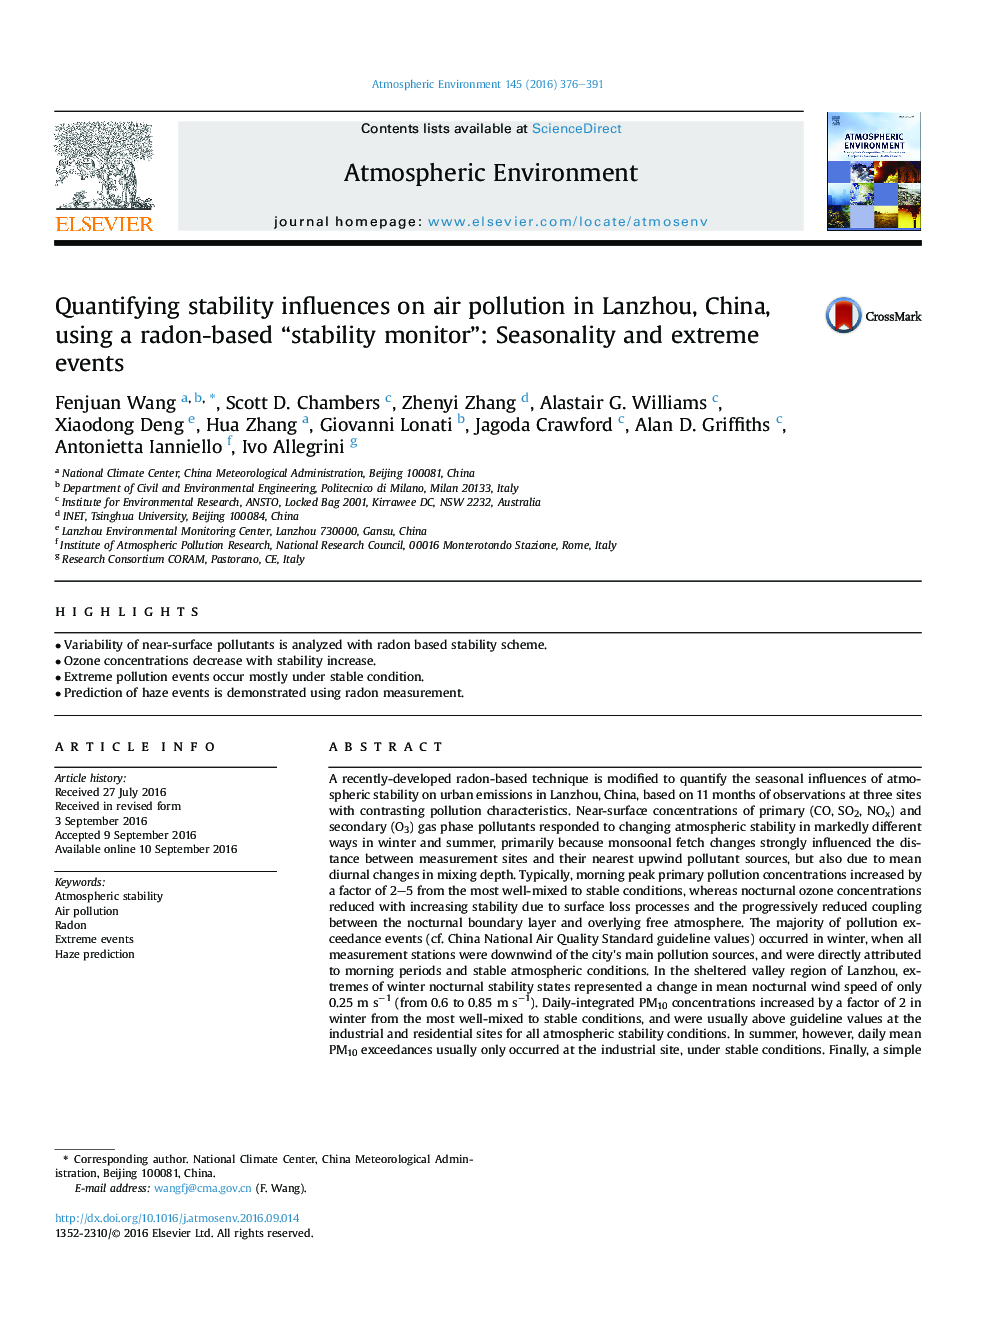 Quantifying stability influences on air pollution in Lanzhou, China, using a radon-based “stability monitor”: Seasonality and extreme events